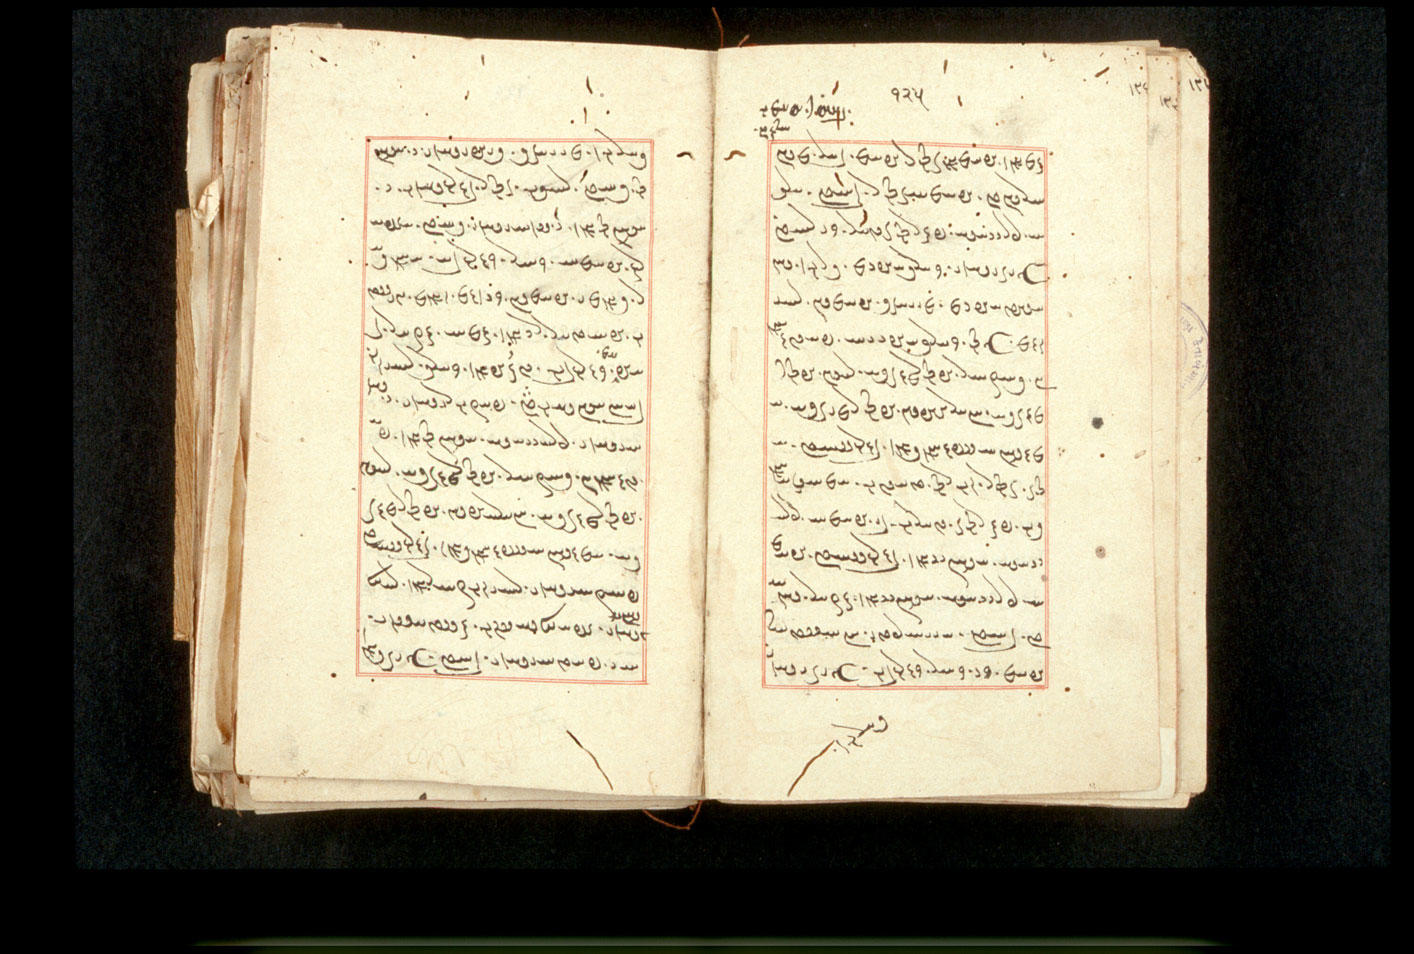 Folios 125v (right) and 126r (left)